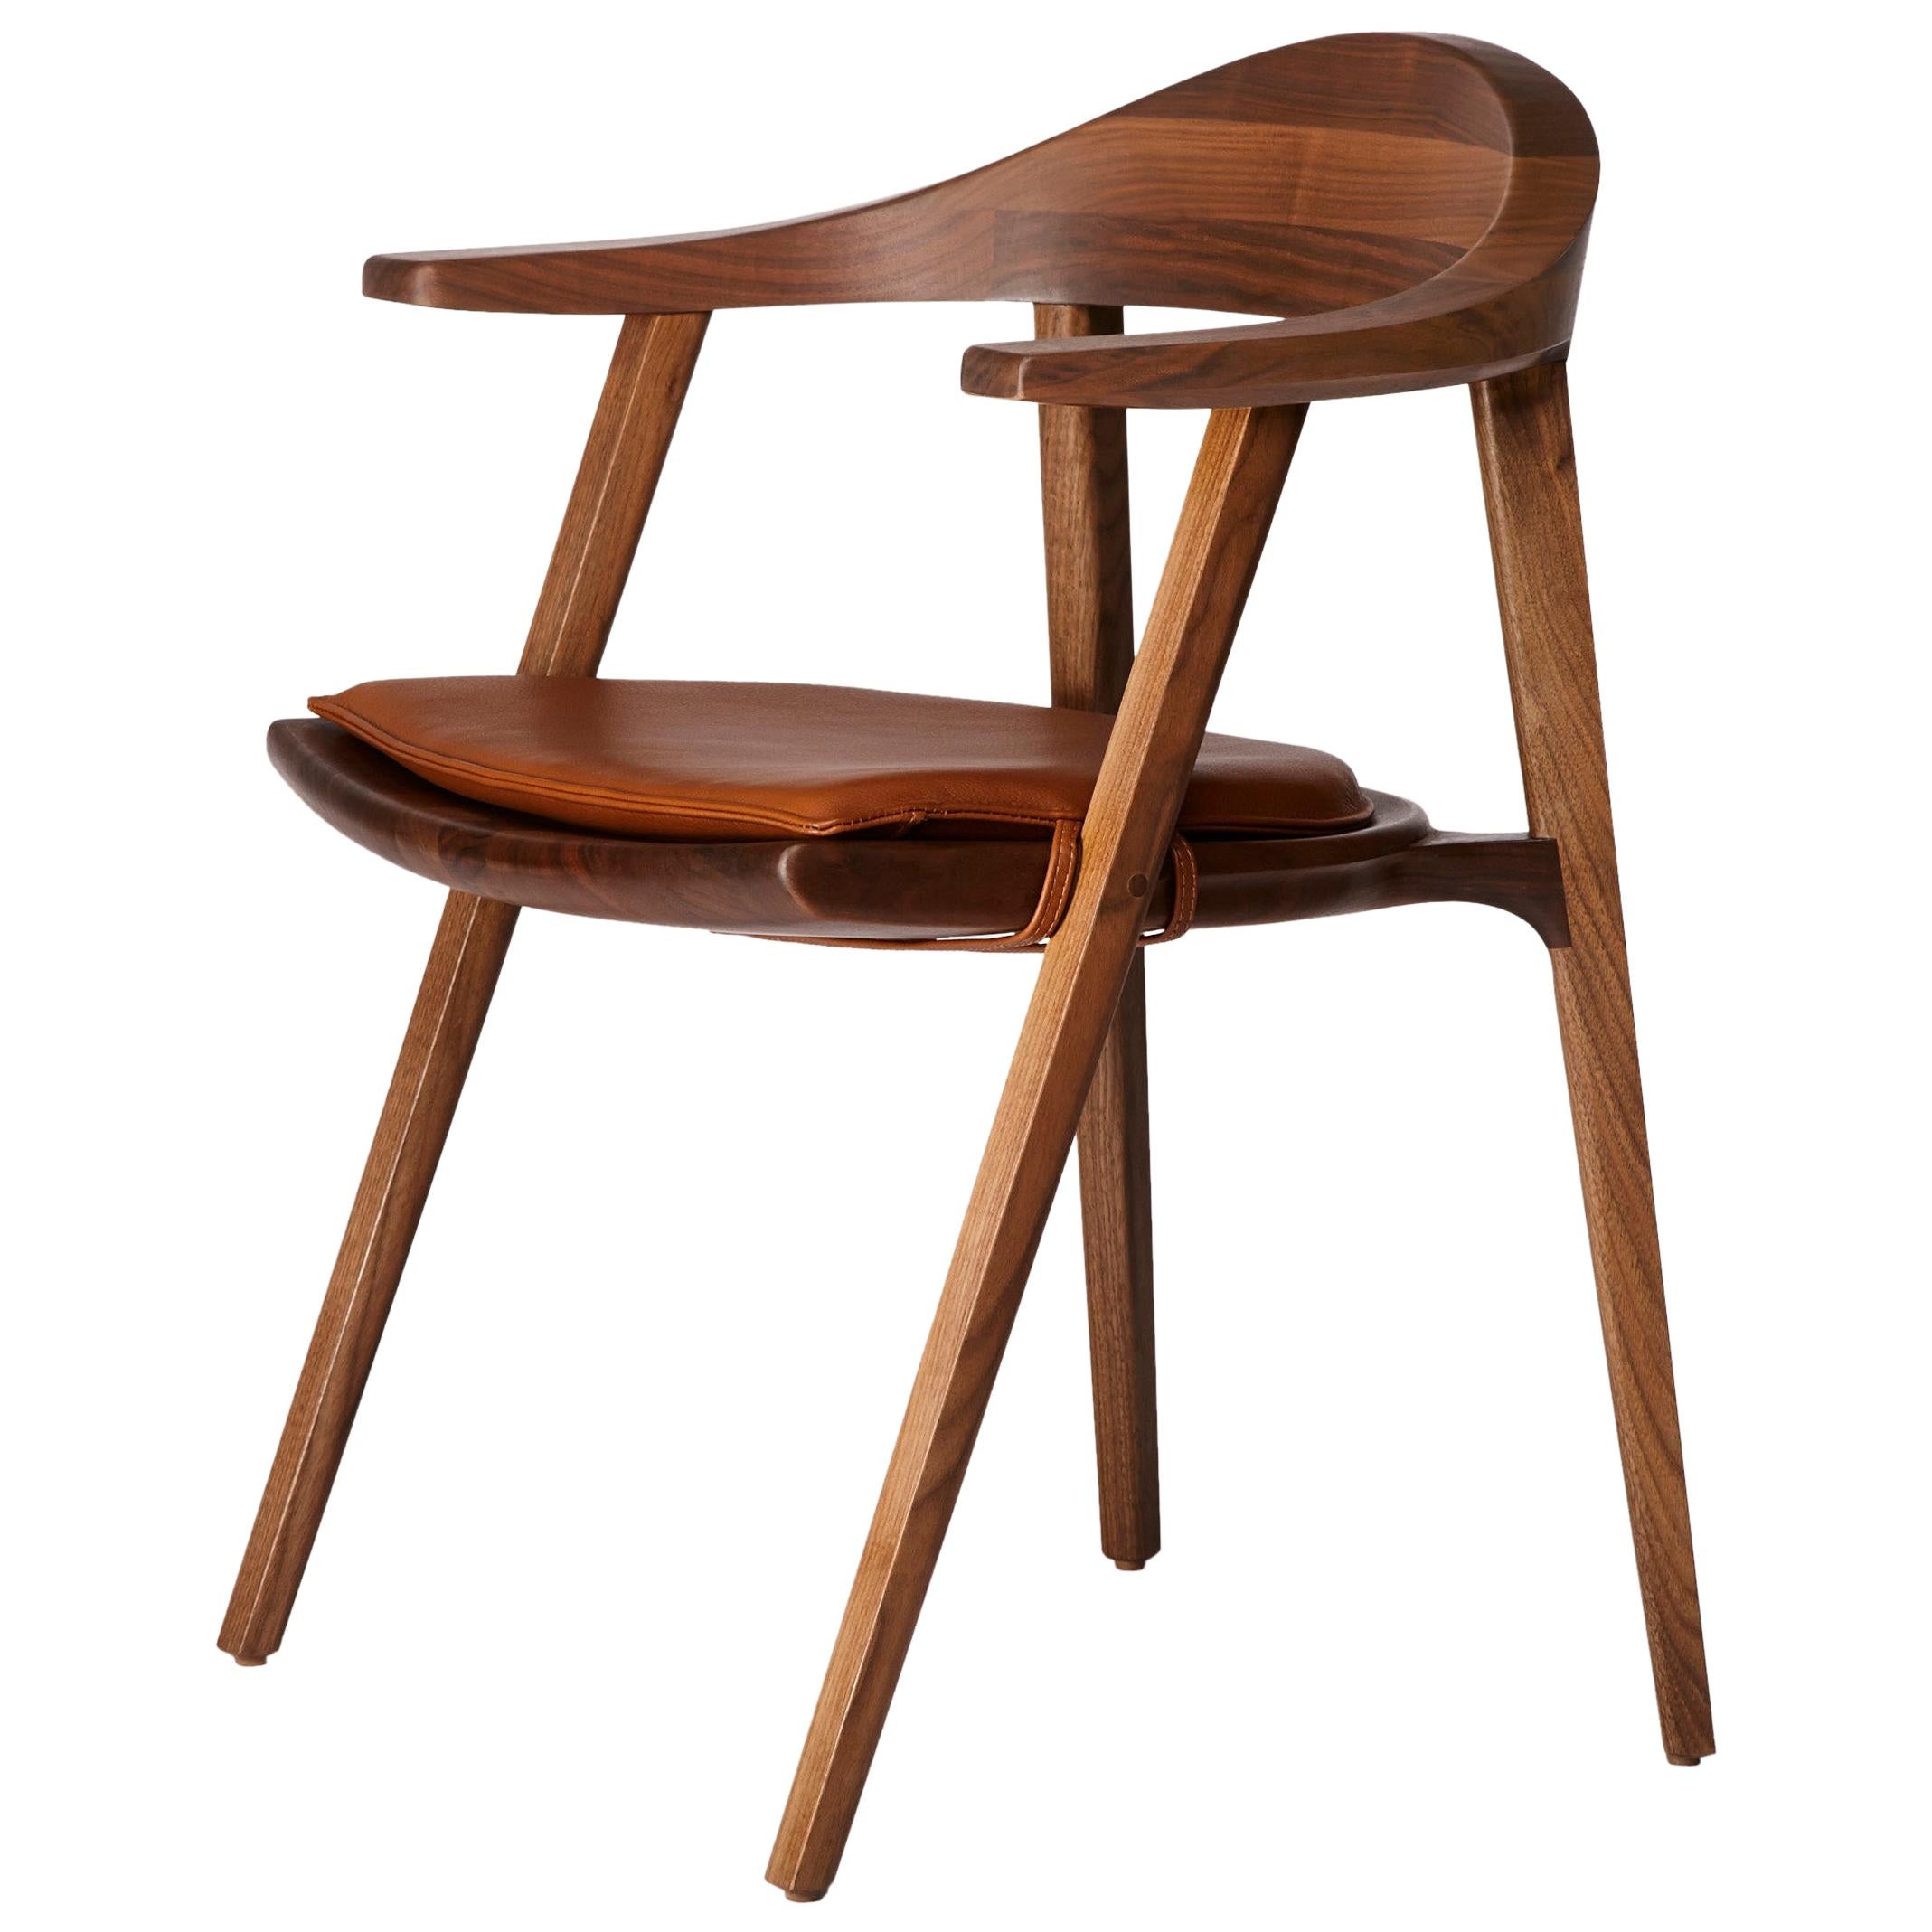 Mantis Chair in Solid Walnut with Leather Cushion Designed by Craig Bassam